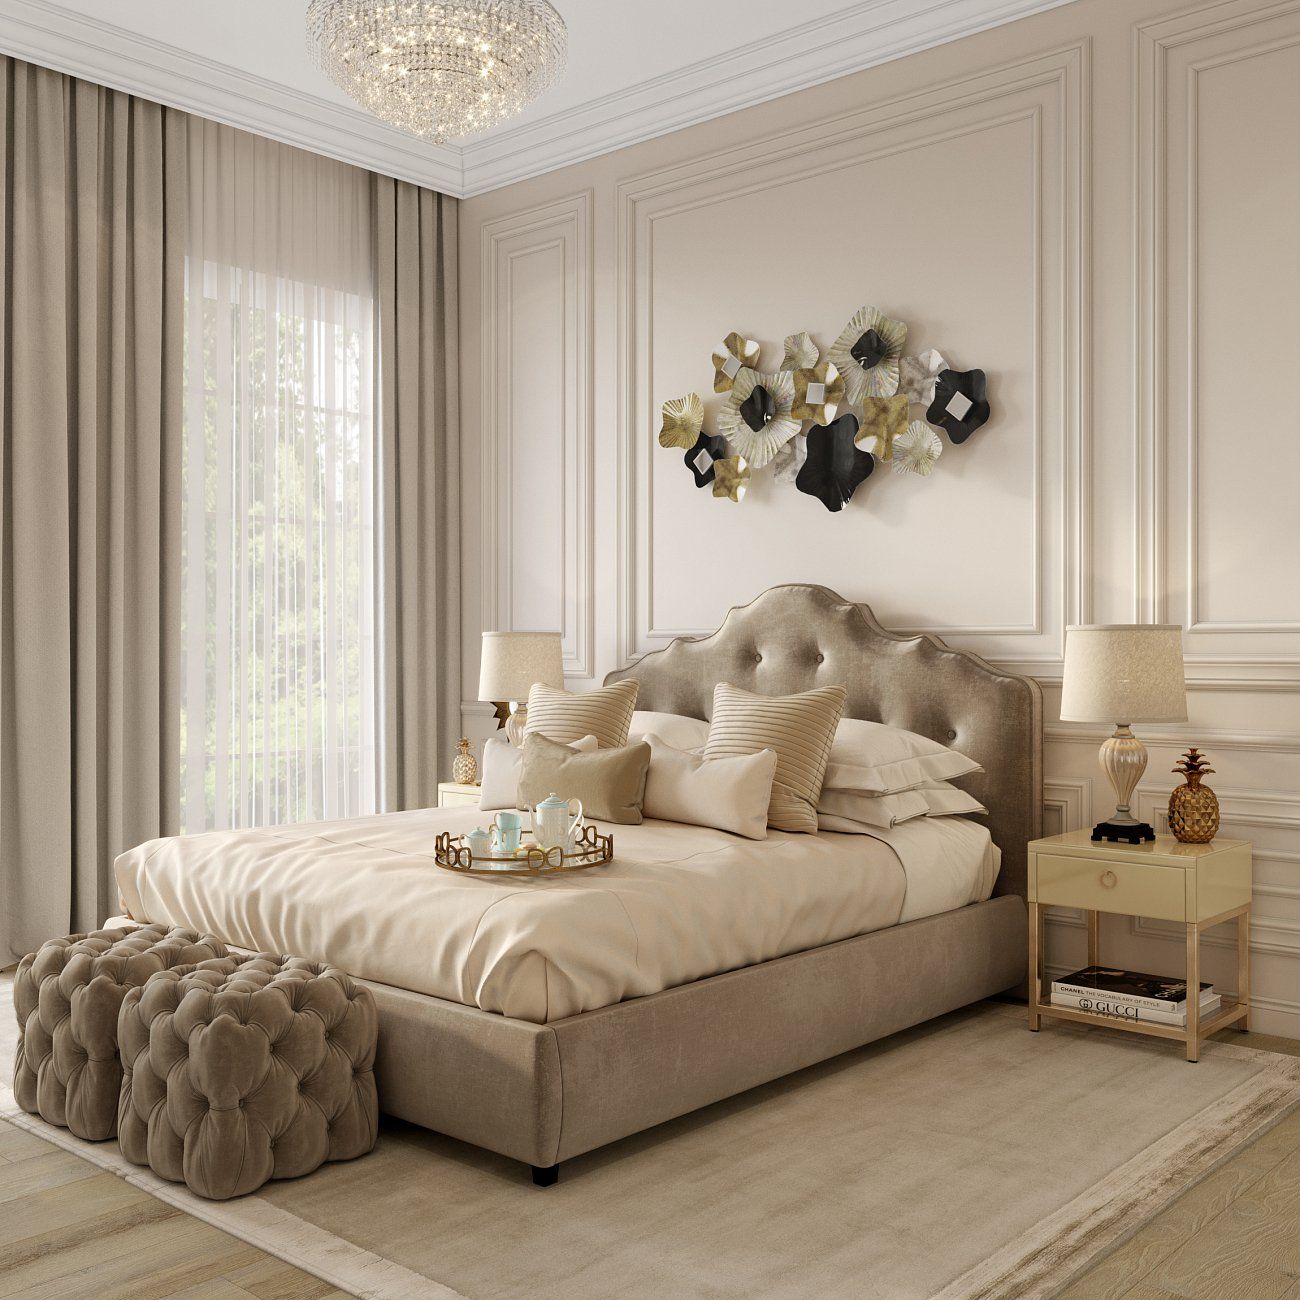 Euro 200x200 cm grey-brown Palace bed